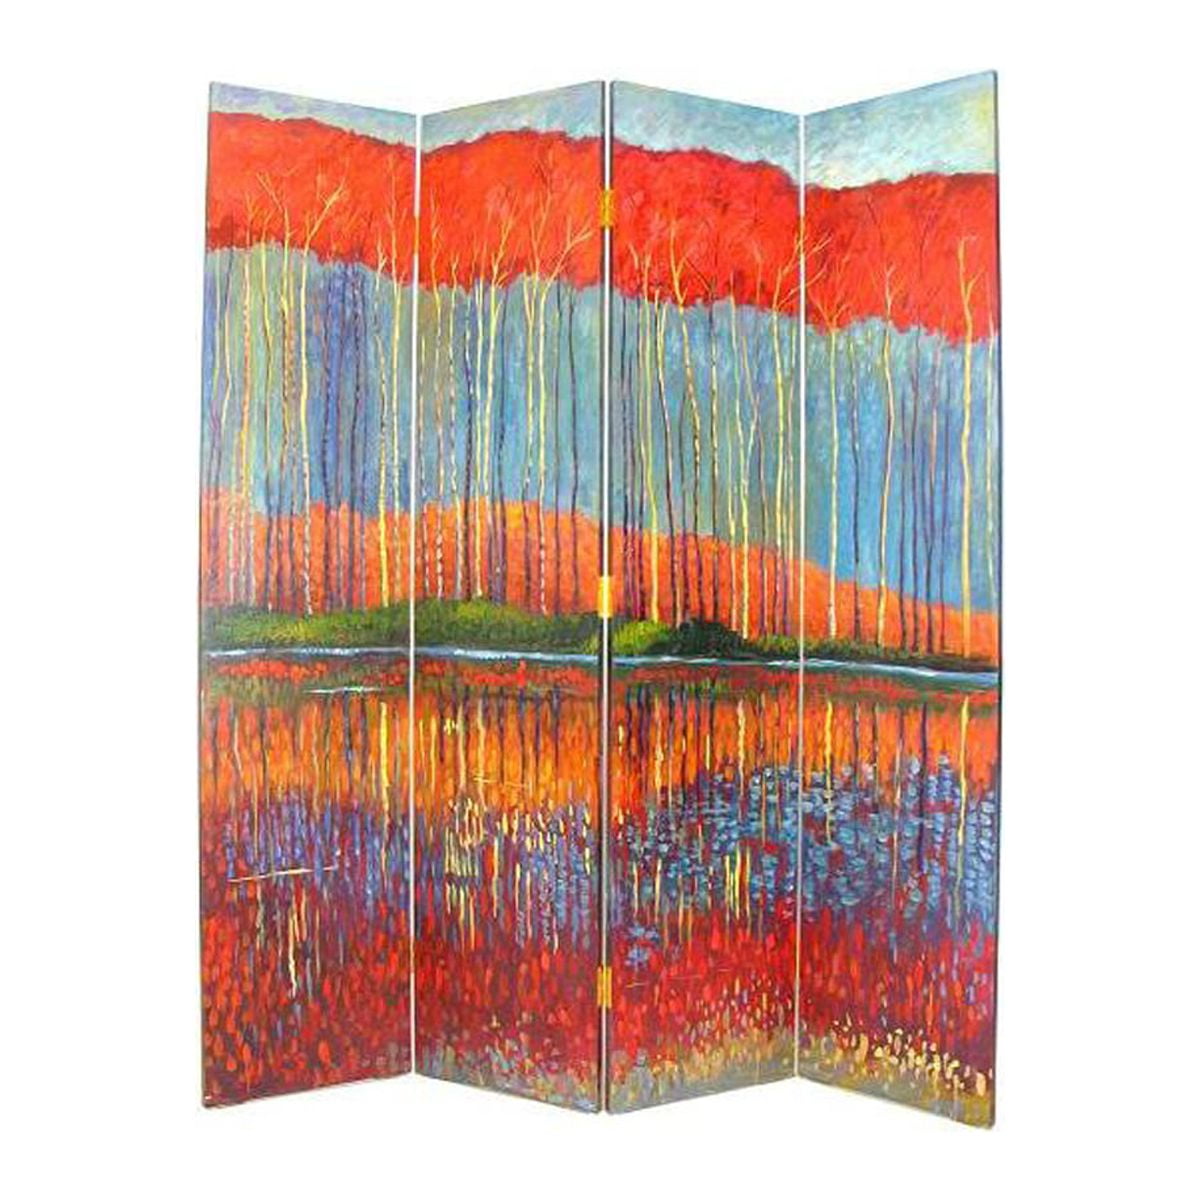 Picture of Benjara BM213516 Wooden 4 Panel Room Divider with Forest Theme - Multi Color